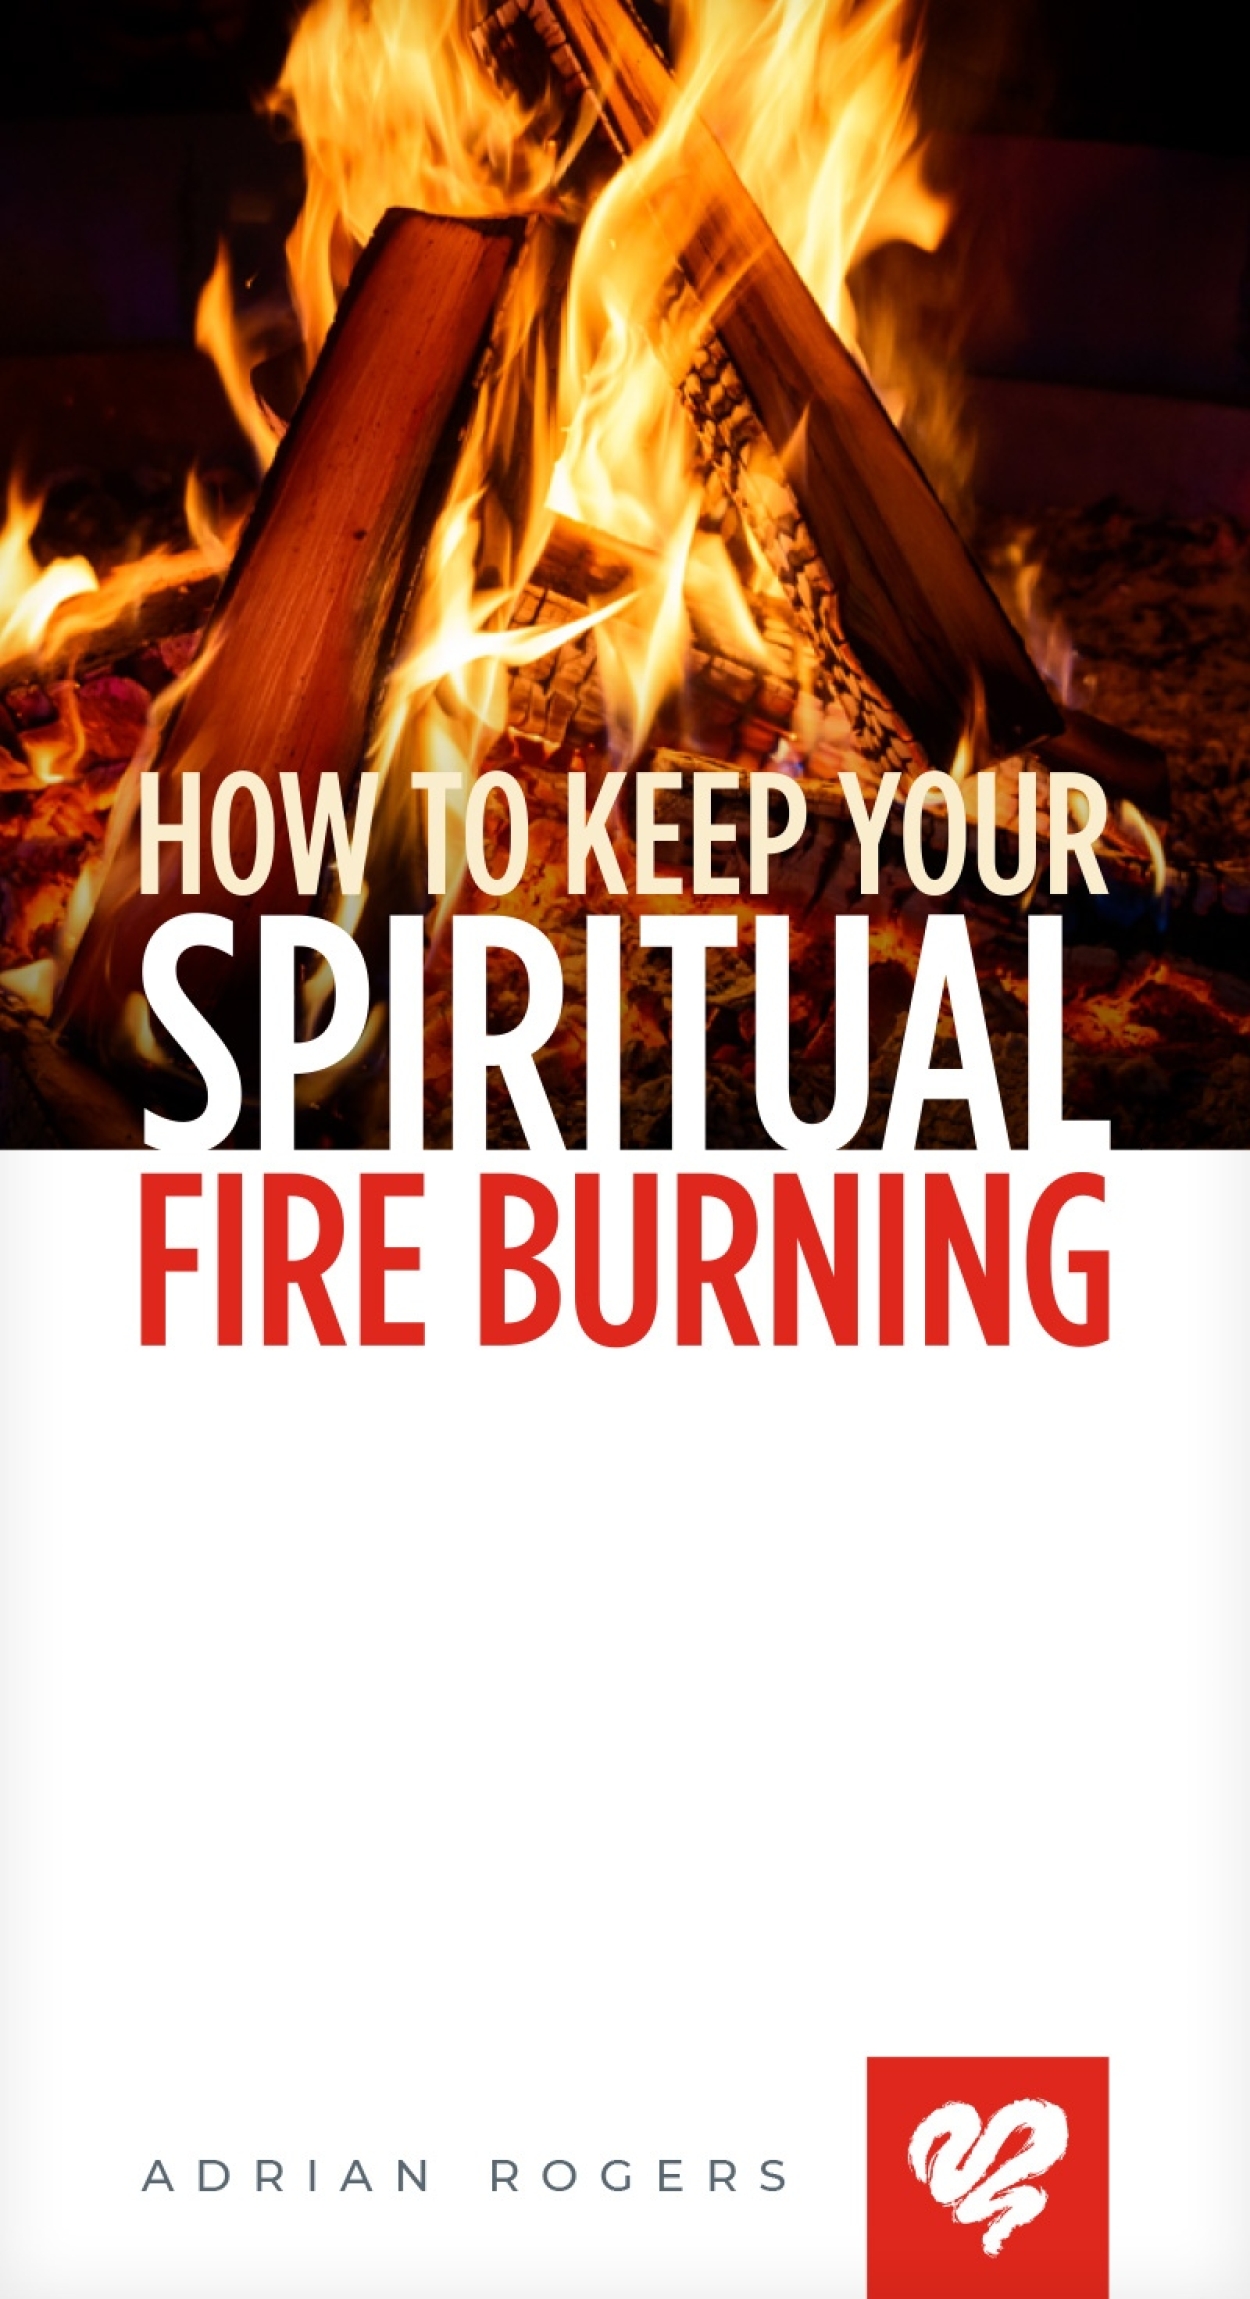 How to keep your spiritual fire burning booklet k142